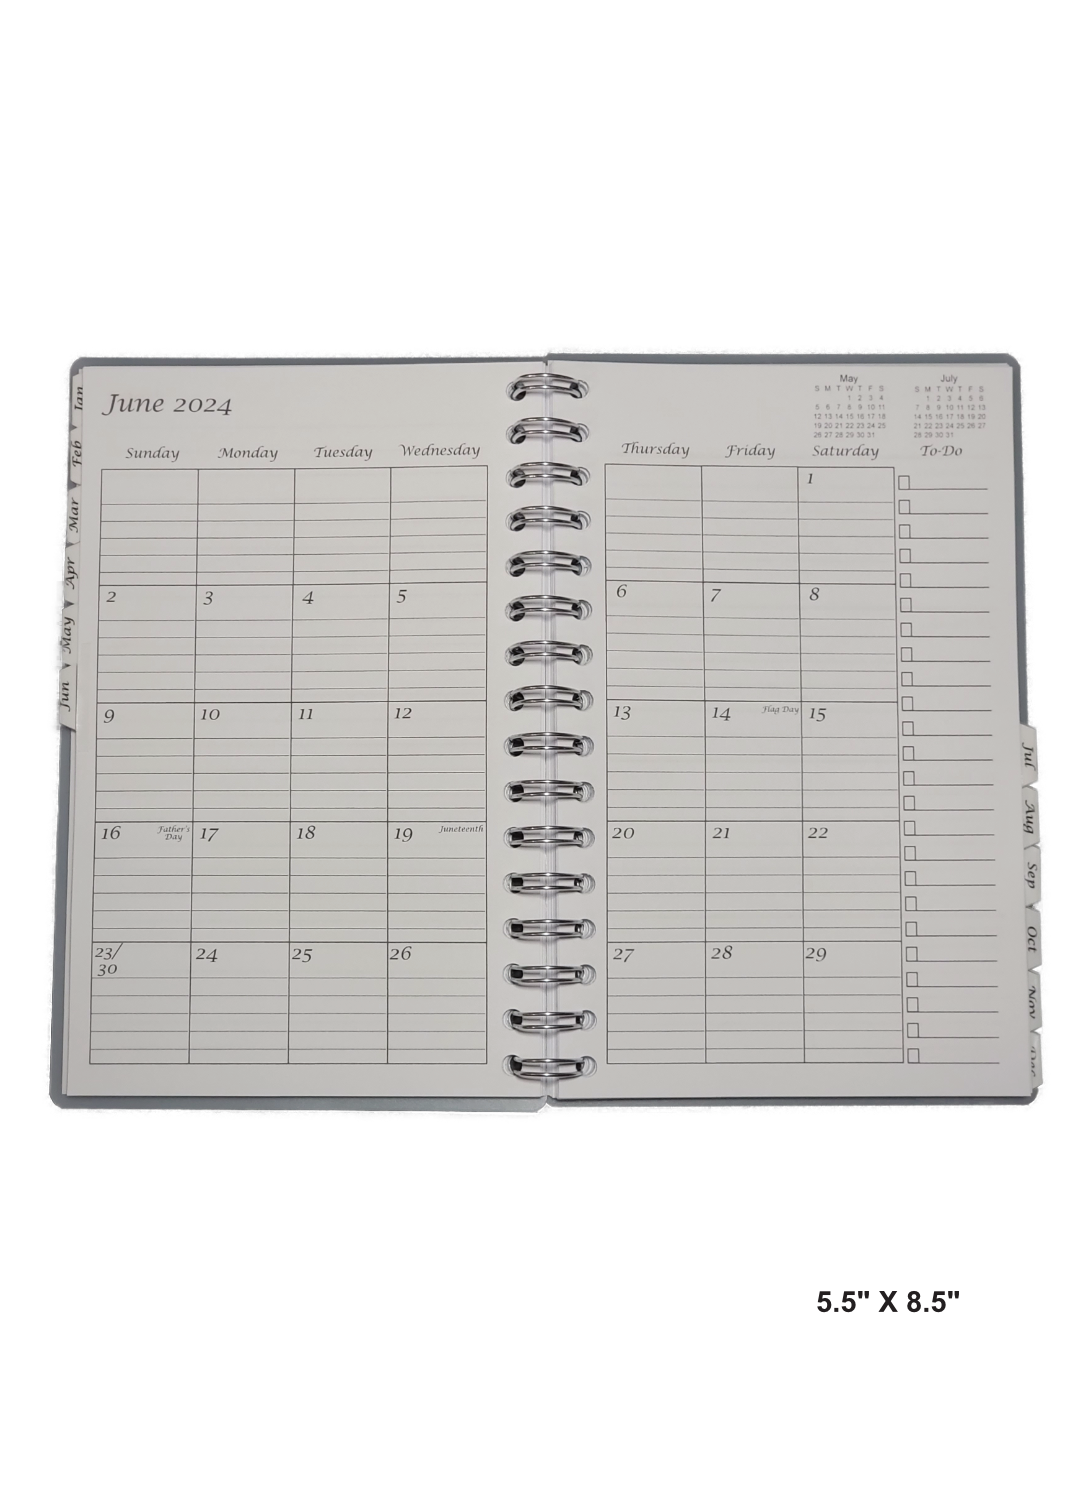 Inside view of a 5.5" x 8.5" hand-made 12 month planner with a clean and organized layout. Each month has dedicated pages with ample writing space and clear headings. A practical and visually appealing tool for staying organized